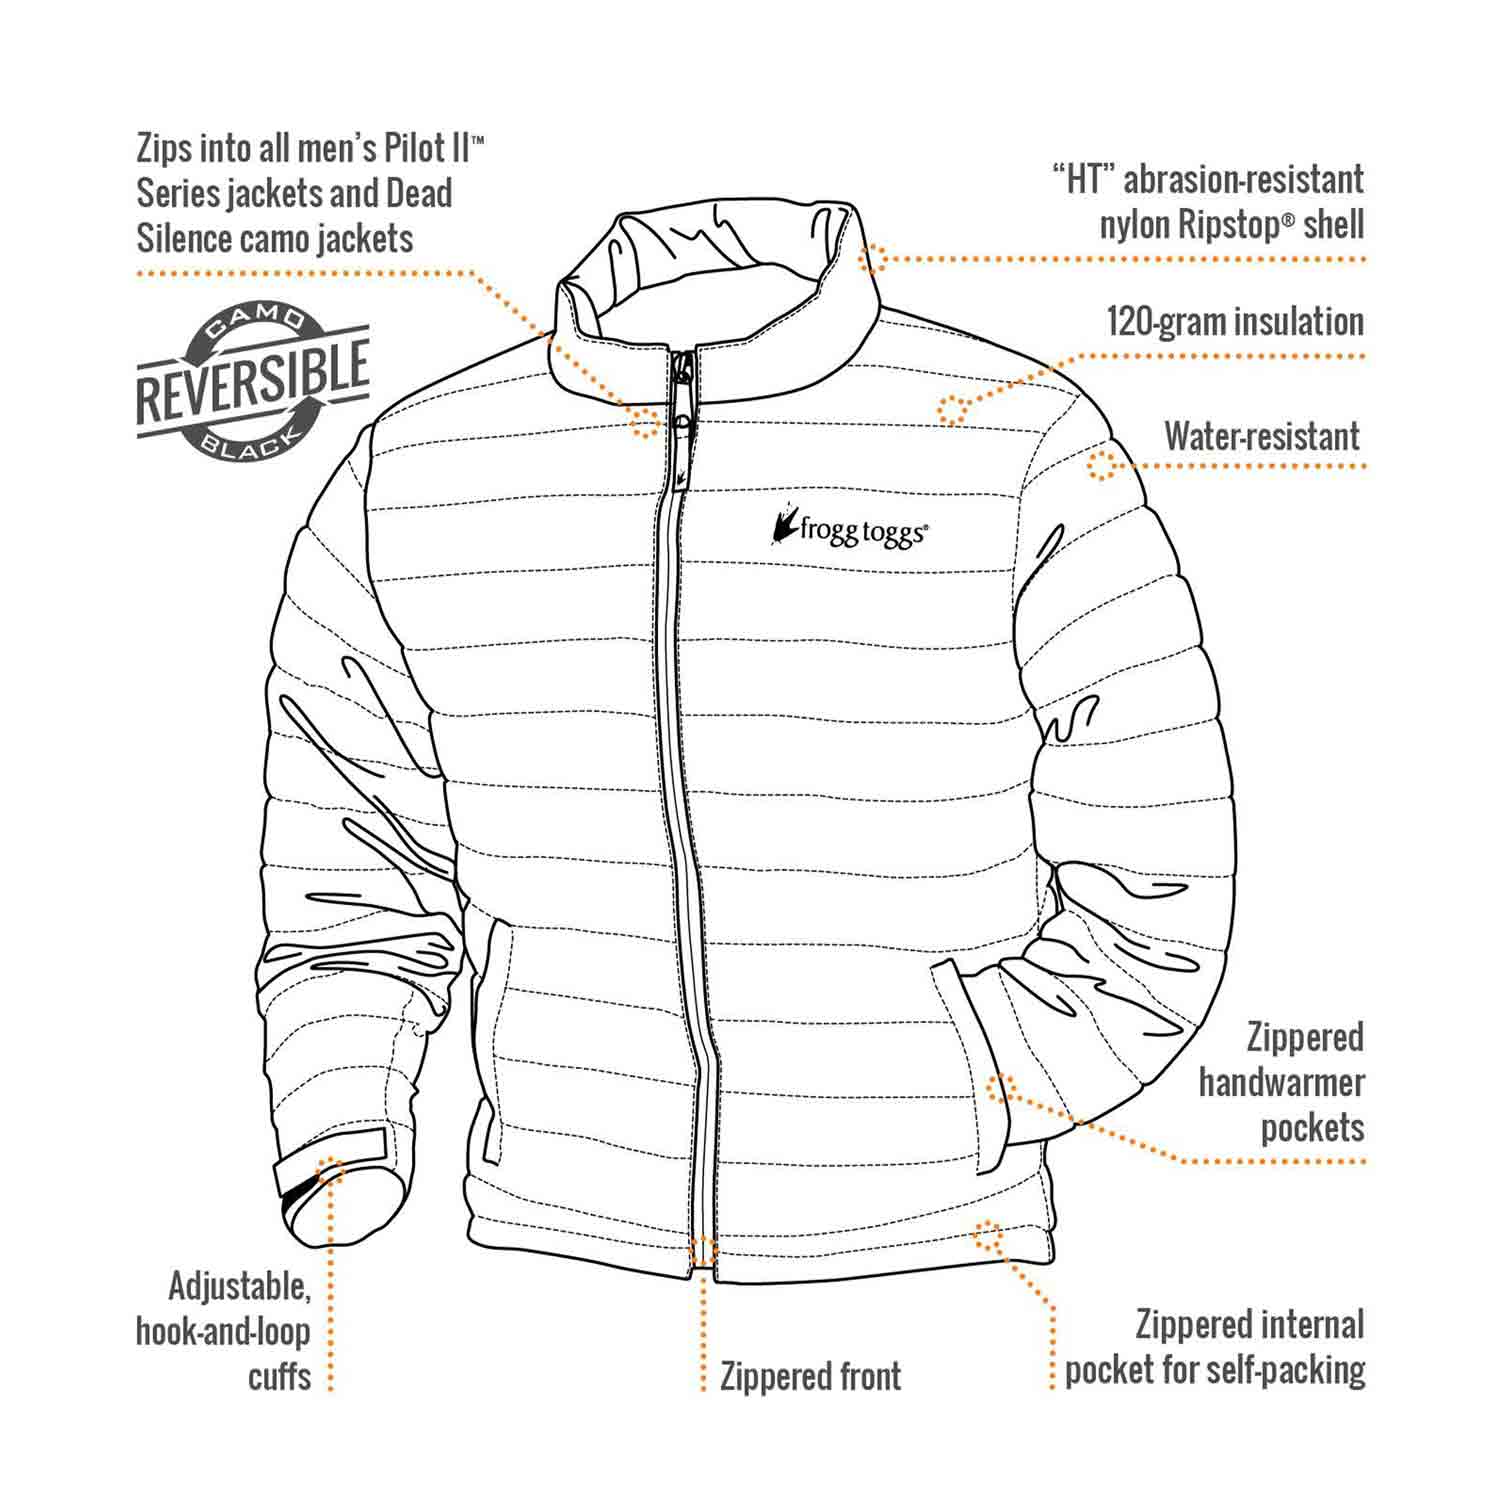 Frogg Toggs Co-Pilot Insulated Puff Jacket, Water Resistant, Black, Compatible w/Frogg Toggs Pilot II Series Jackets